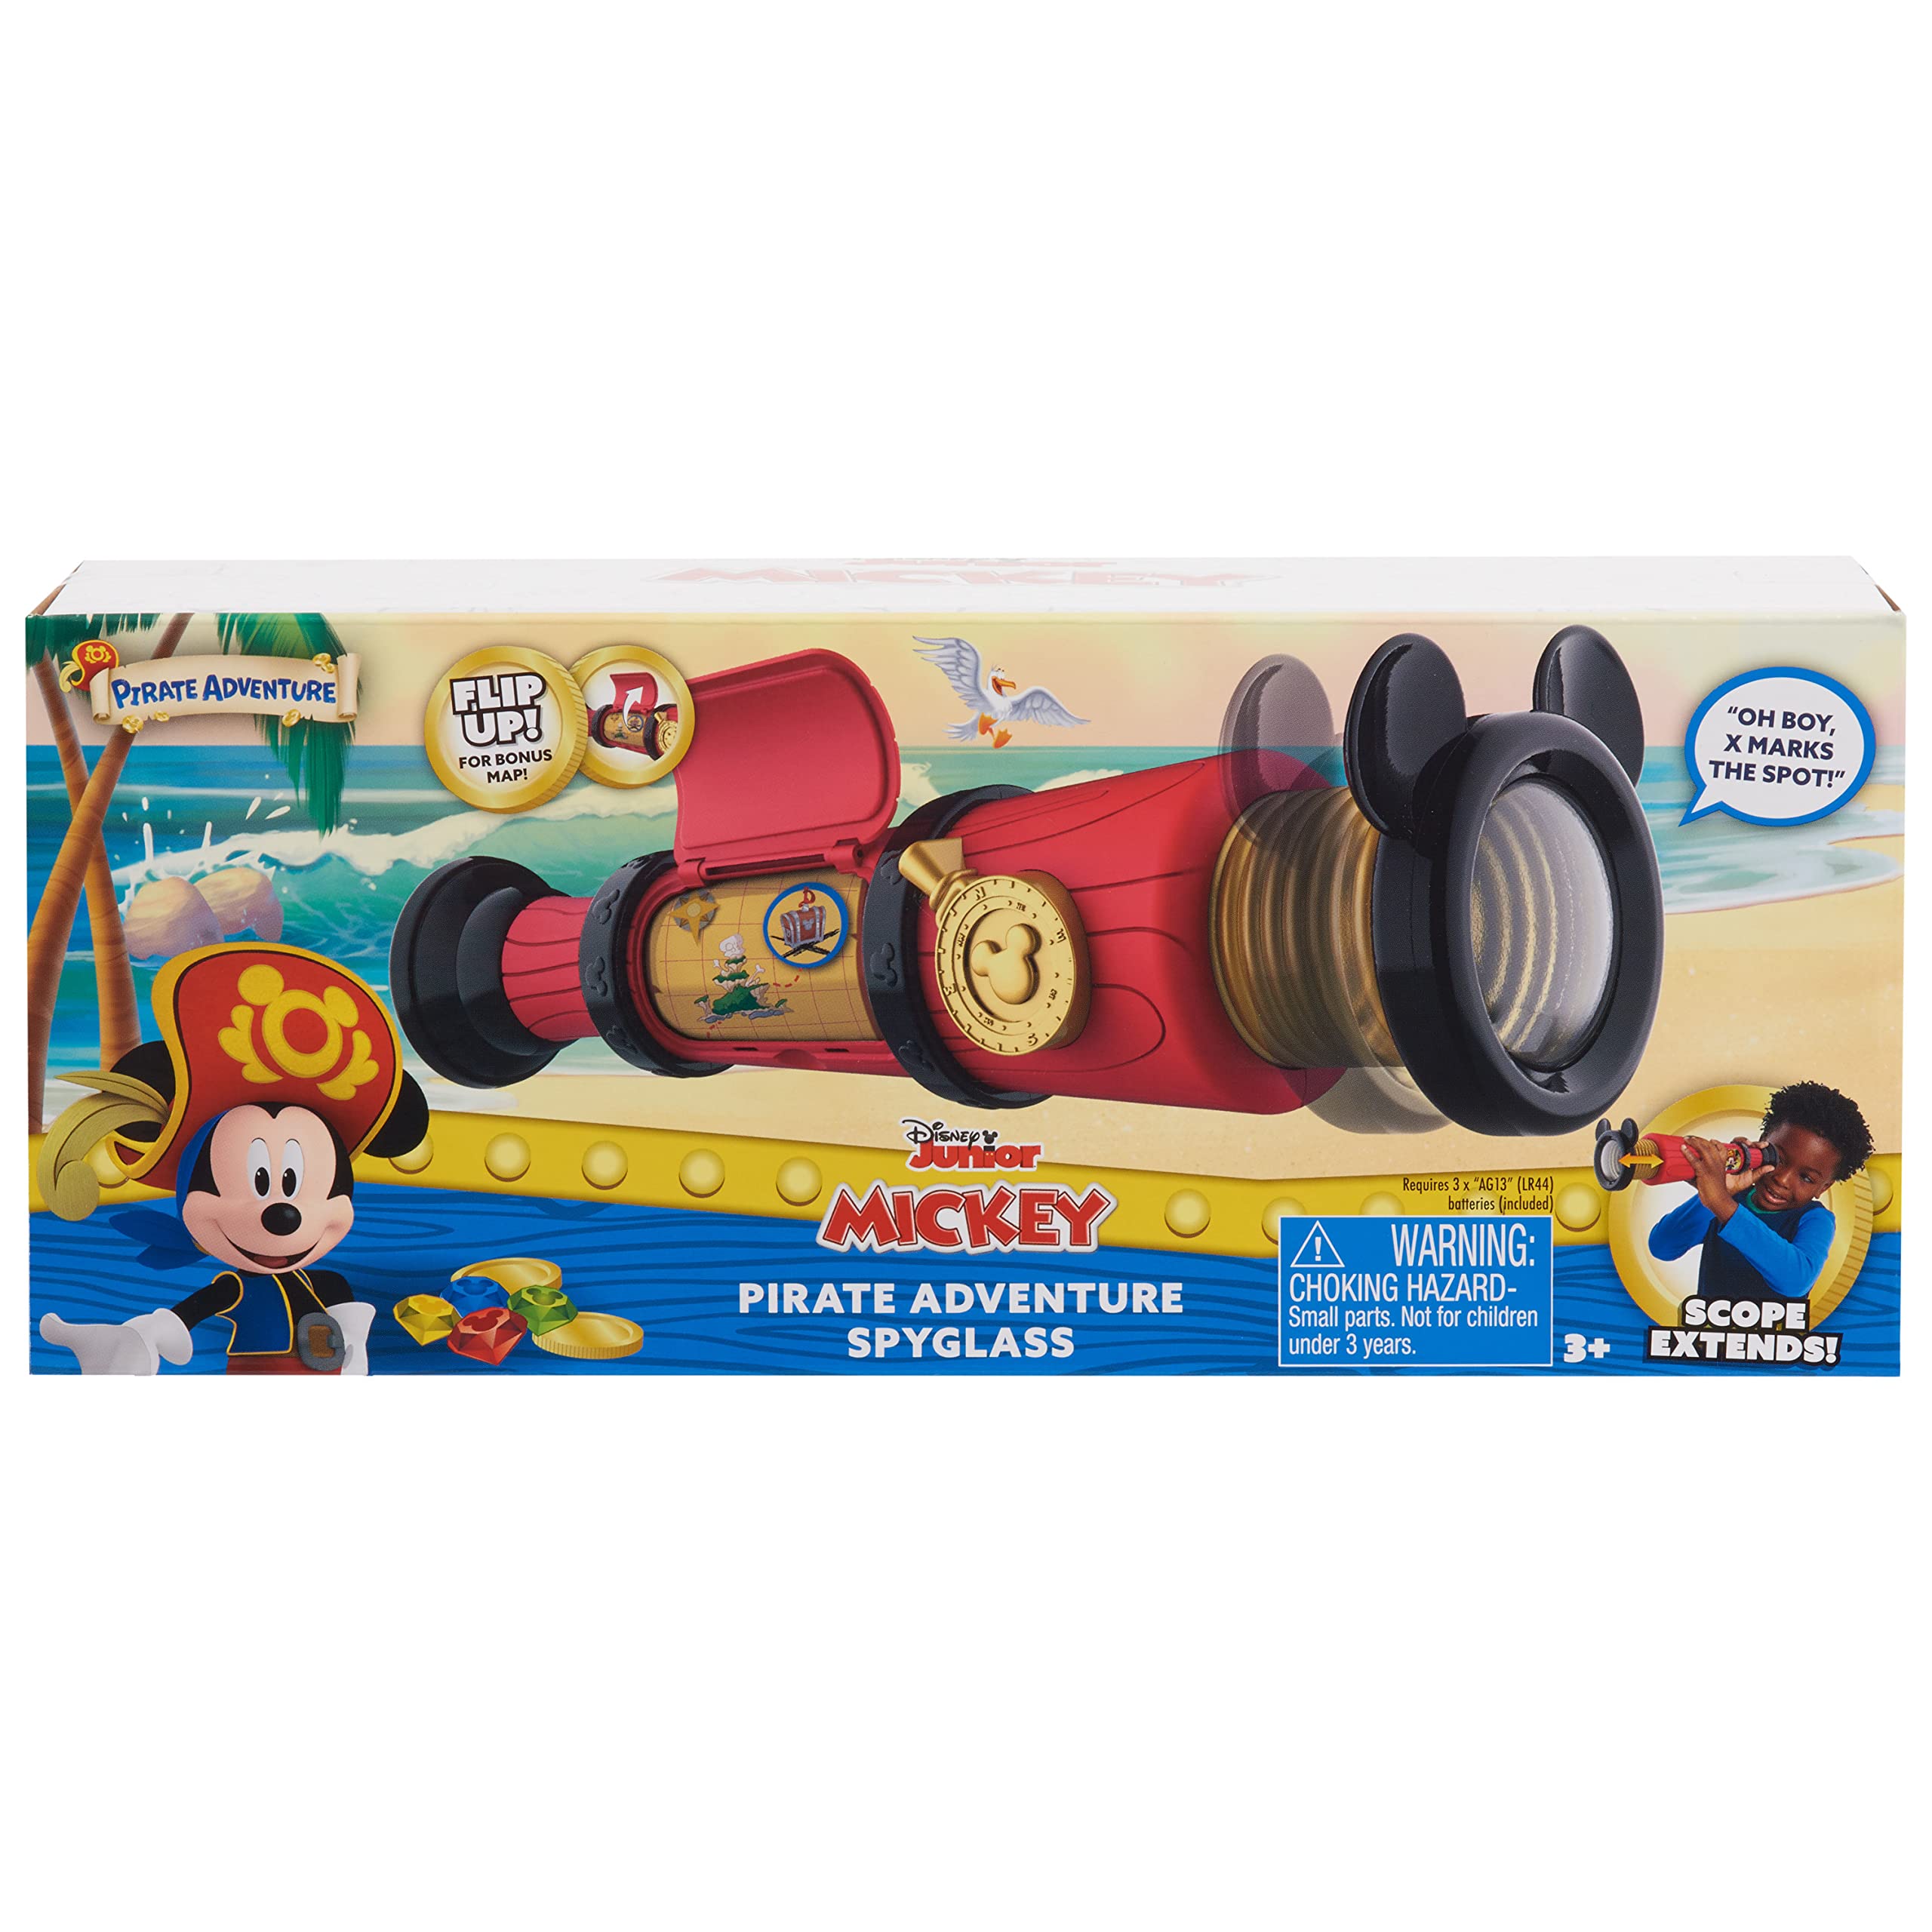 Disney Junior Mickey Mouse Adventure Spyglass With Sounds, Pirate Dress Up And Pretend Play, Officially Licensed Disney Kids Toys For Ages 3 Up